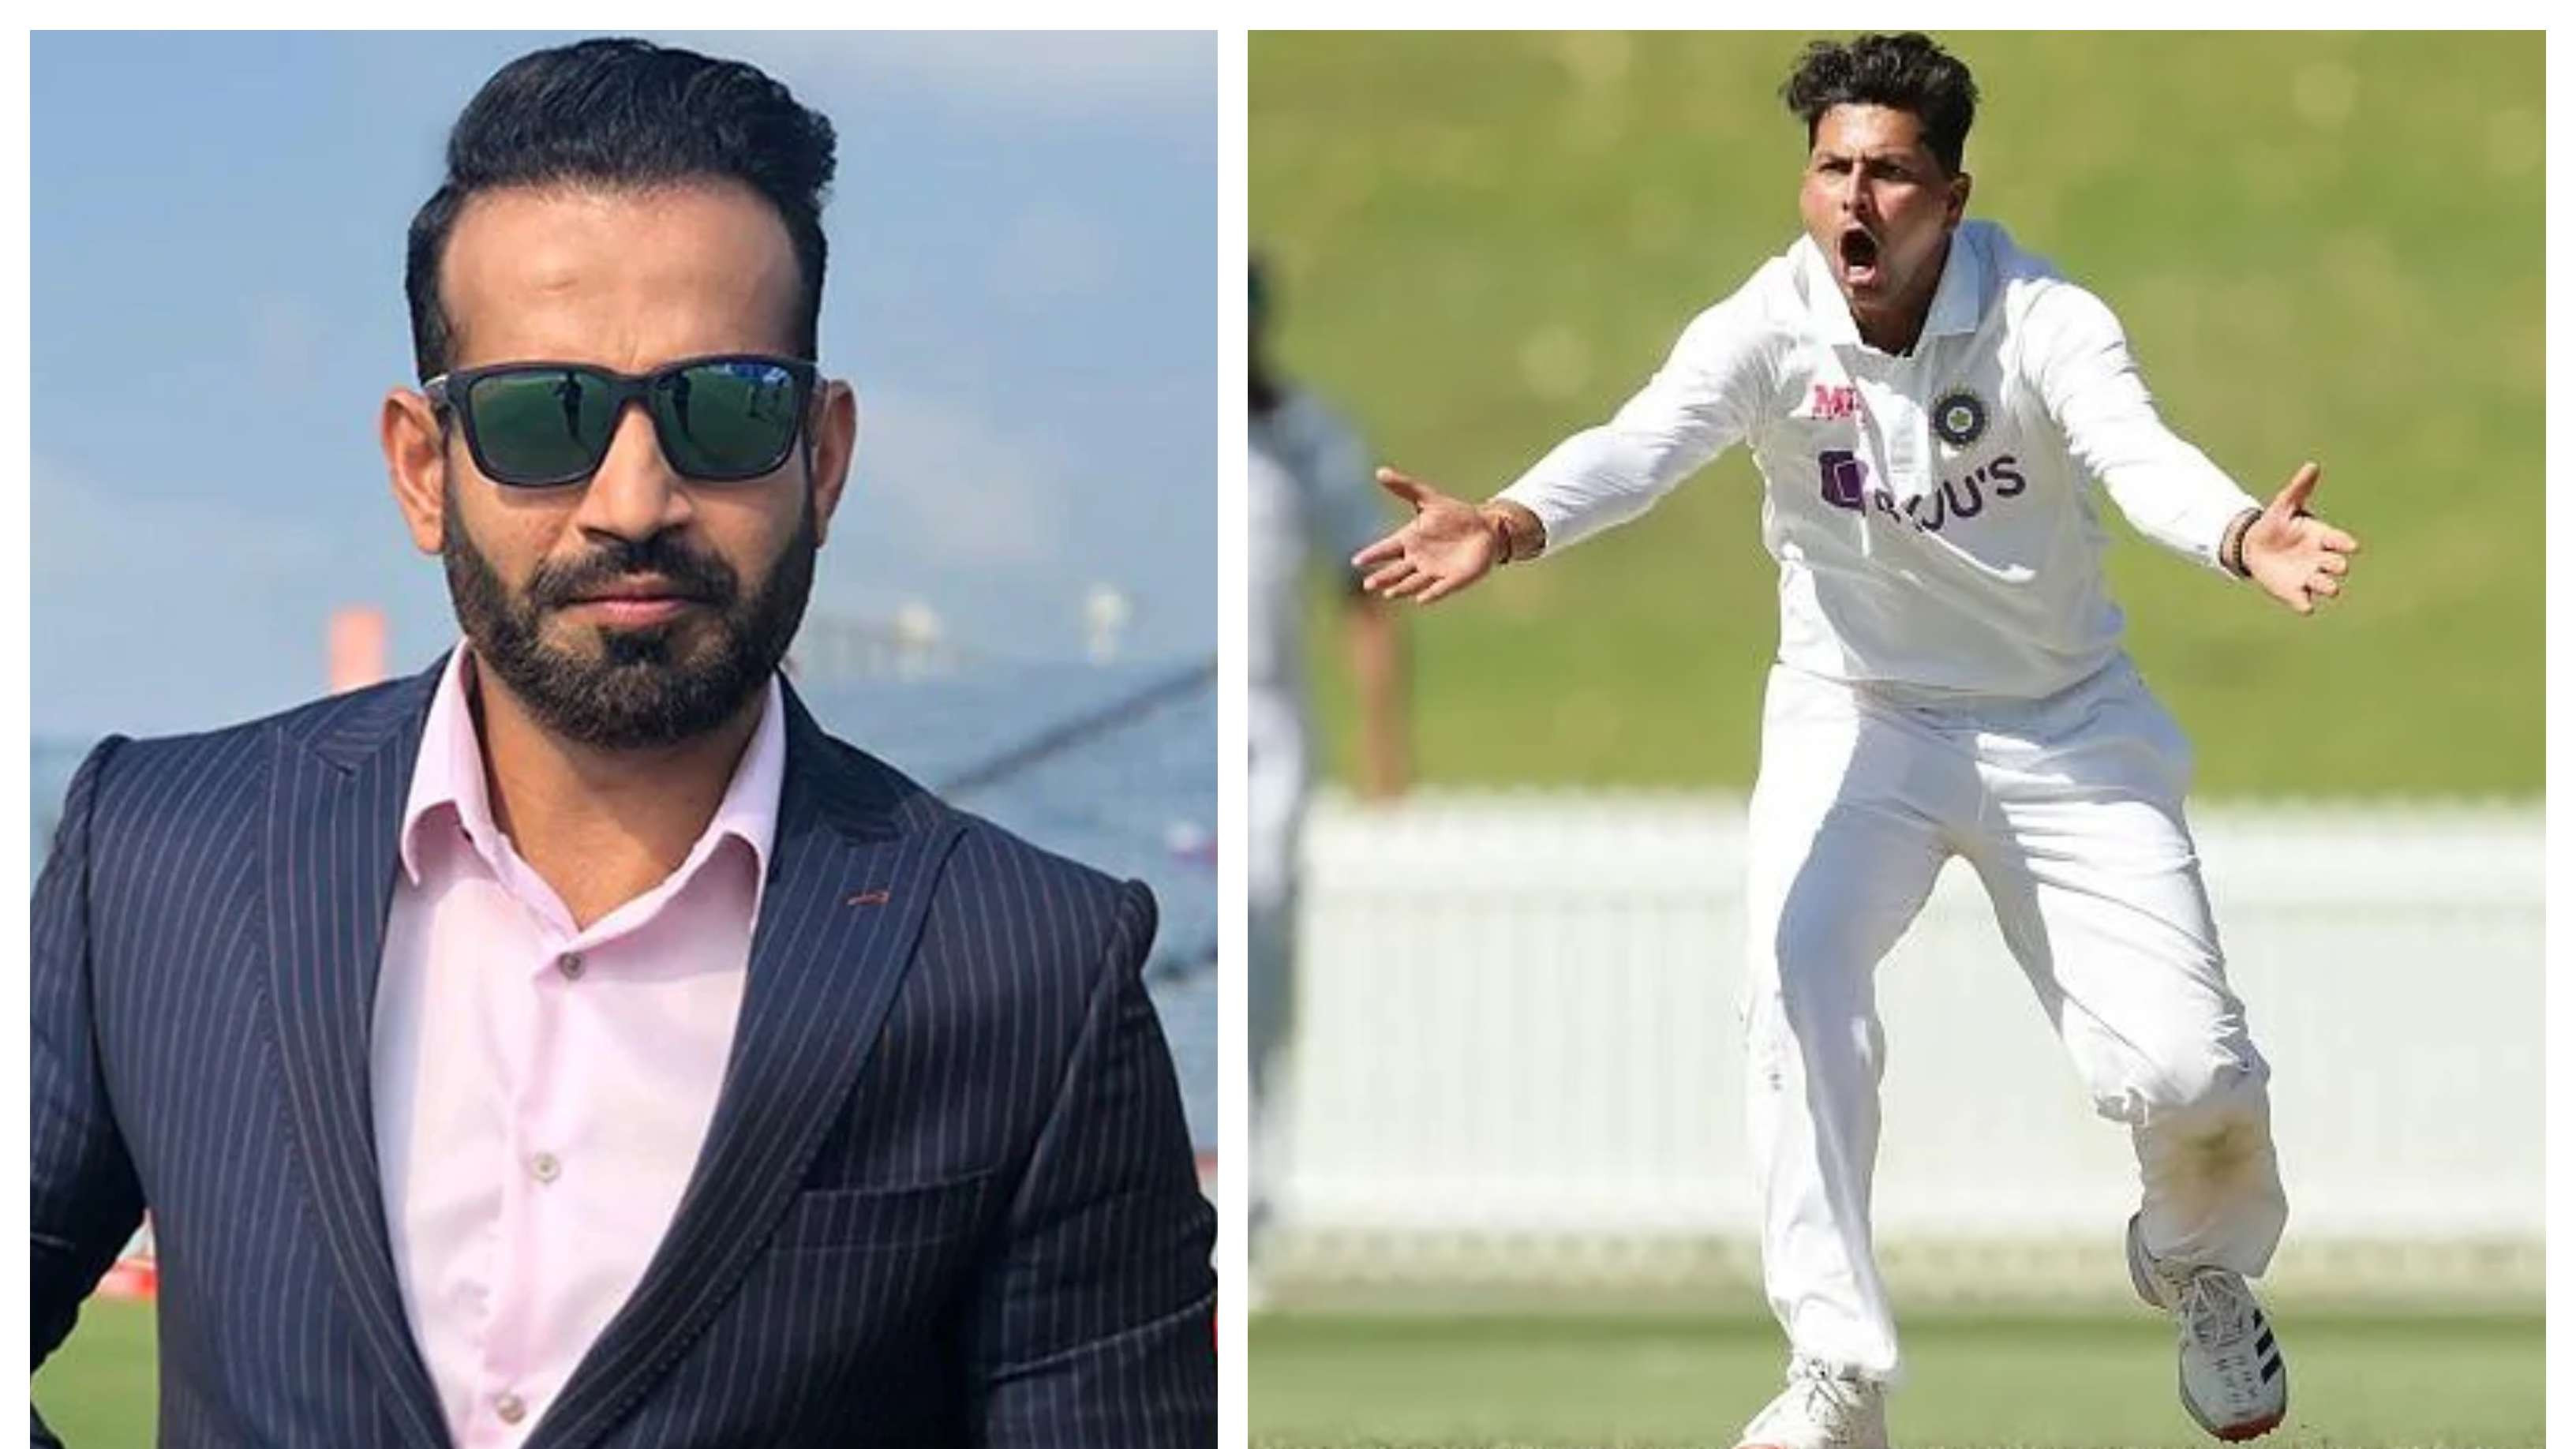 IND v ENG 2021: Irfan Pathan bats for Kuldeep Yadav’s inclusion in India’s playing XI against England